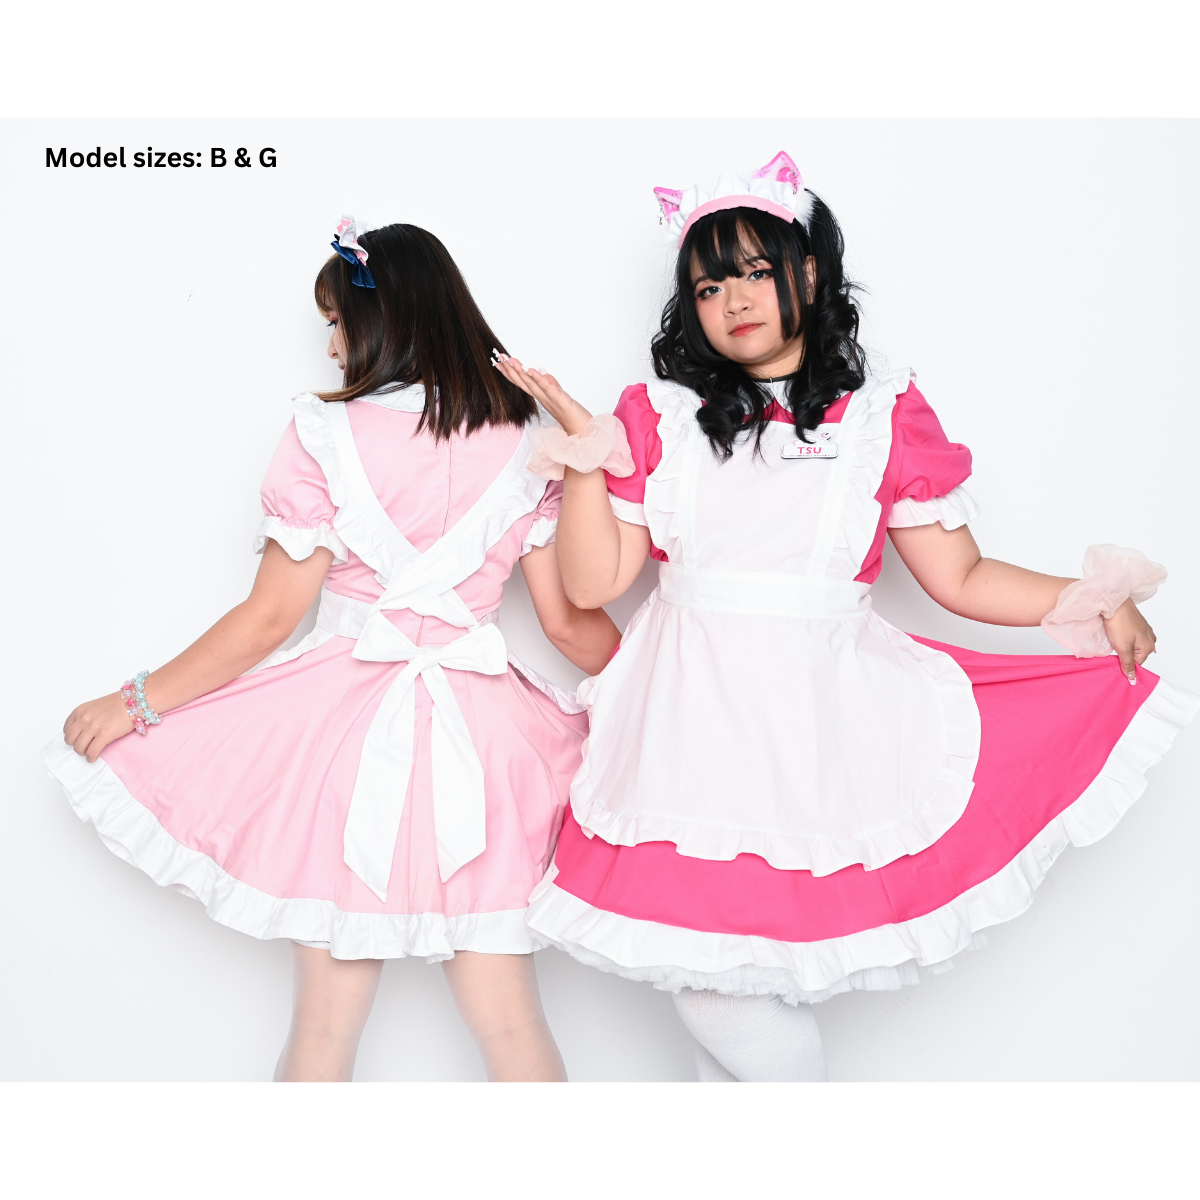 A photo of 2 people wearing maid outfits. The first one is wearing a pink dress with white ruffles and a fully white apron (size B) facing away so you can see the back and criscross ties and bow, the second is wearing a hot pink dress with white ruffles and a fully white apron (size G).